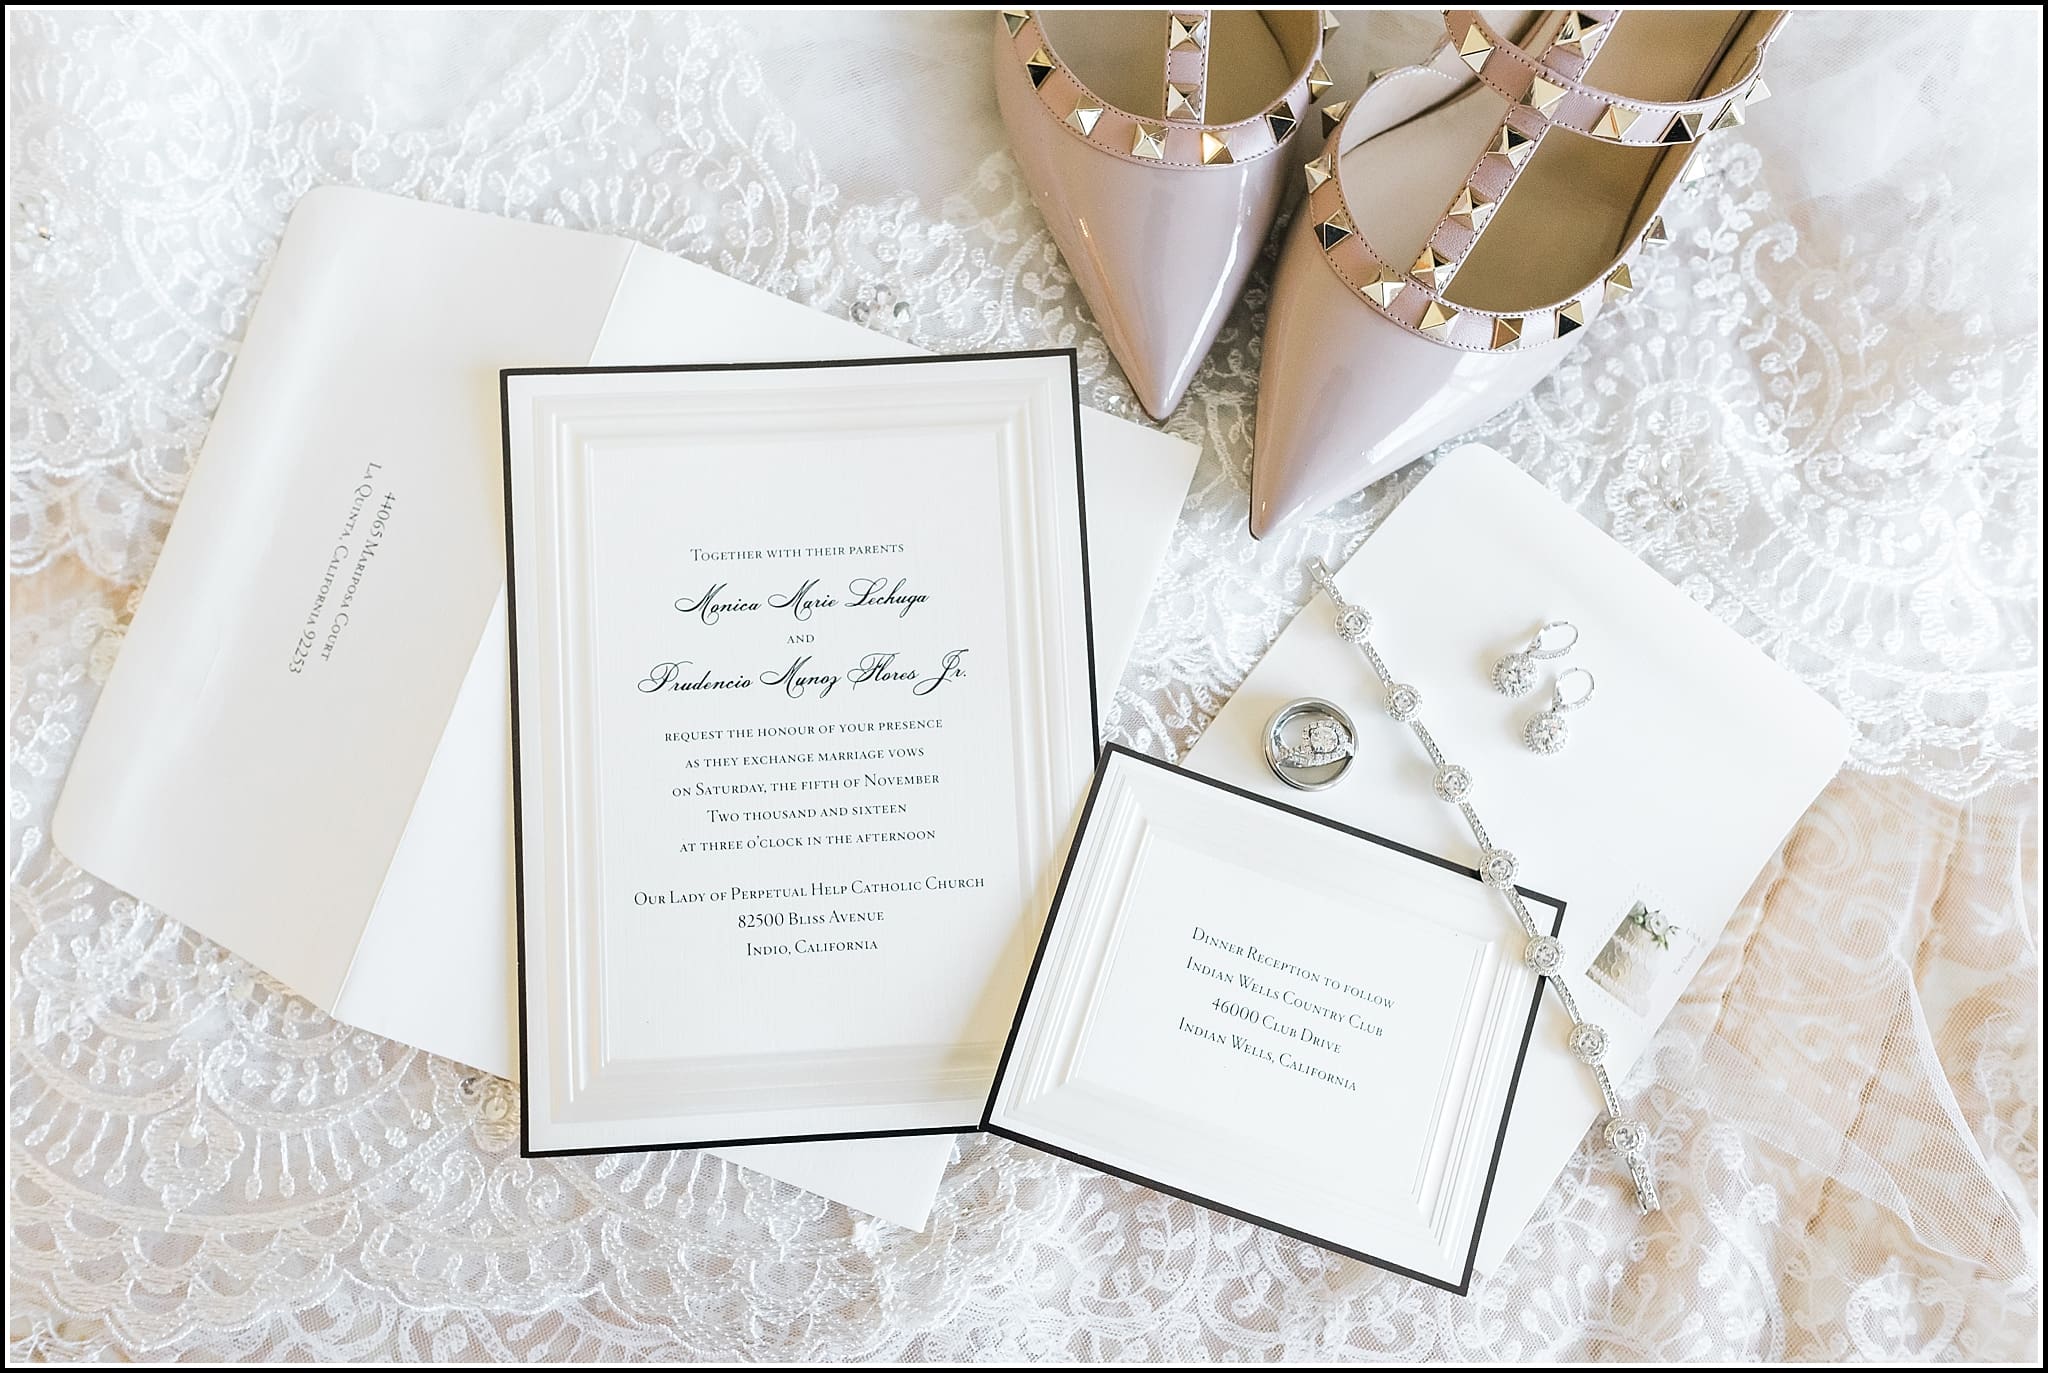  favorite wedding images 2016, wedding photos from 2016, our favorite wedding photos, elegant wedding invitations